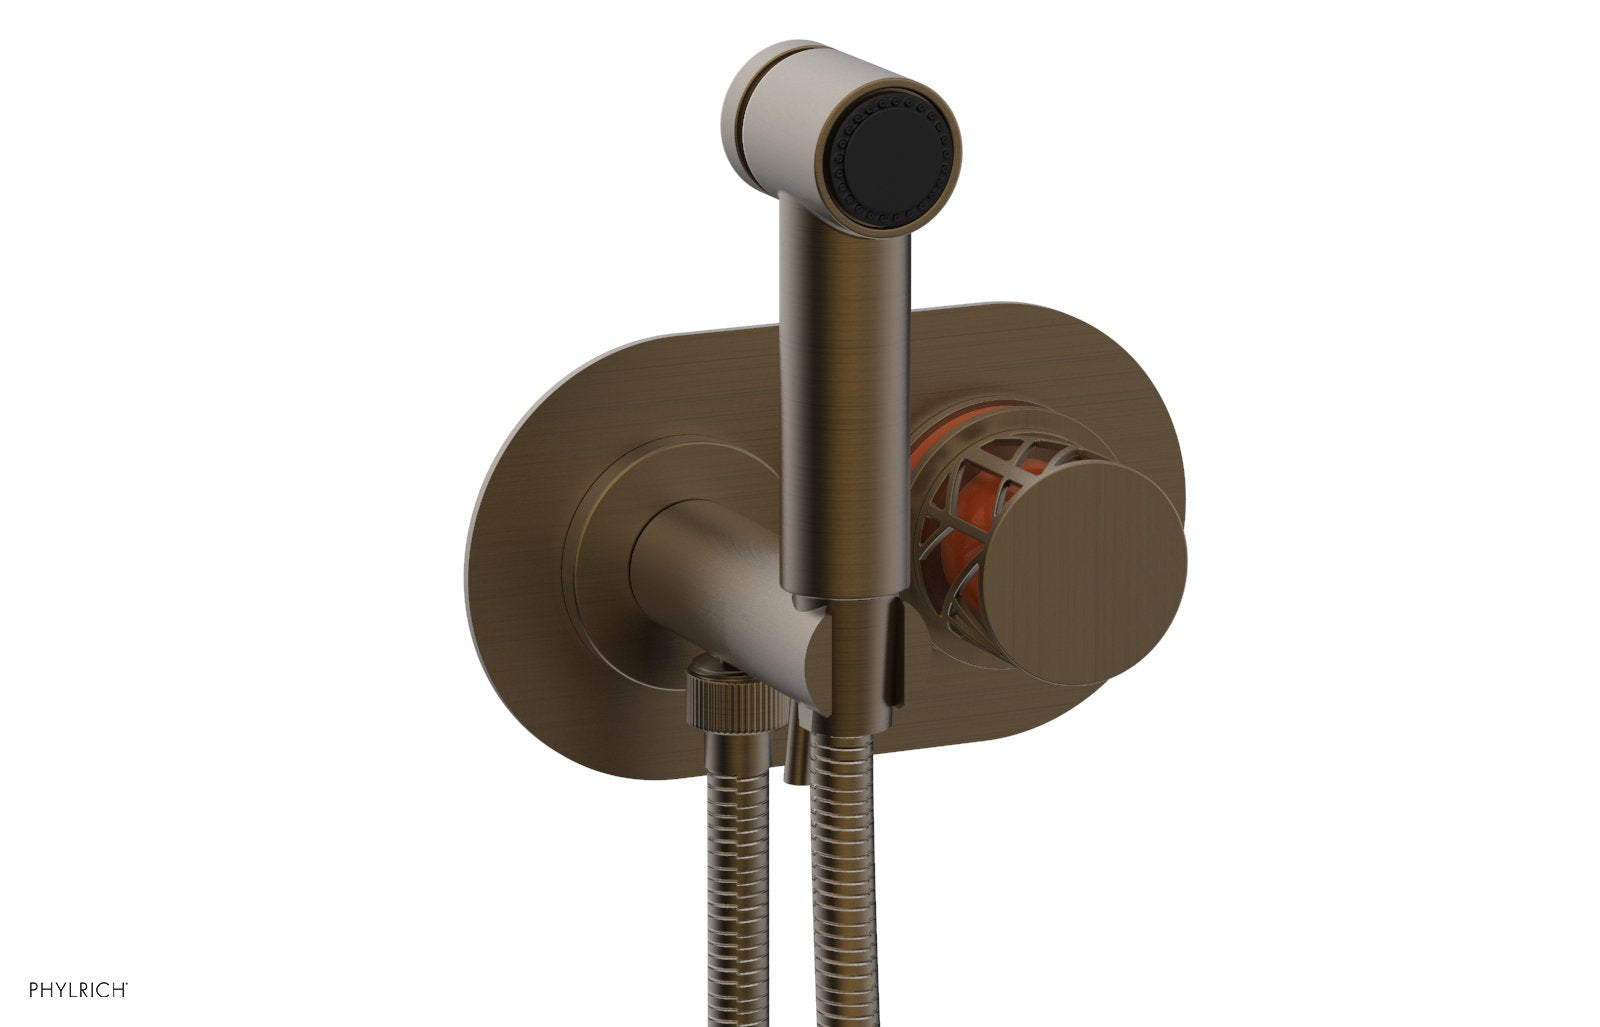 Phylrich JOLIE Wall Mounted Bidet, Round Handle with "Orange" Accents